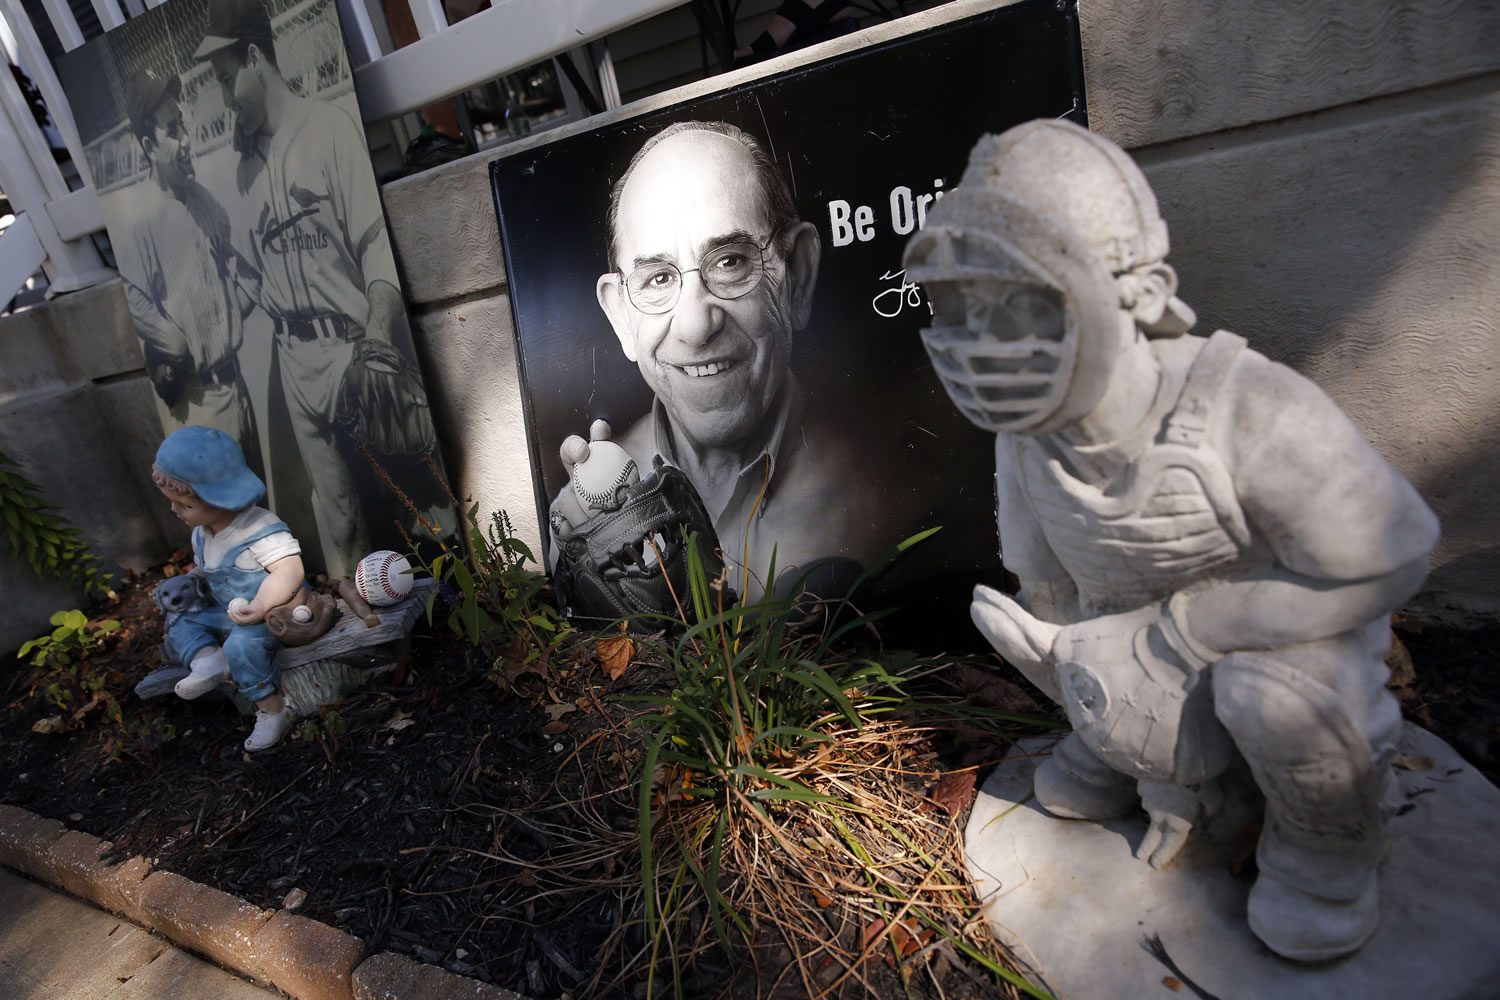 Photos and baseball-themed lawn ornaments sit outside the boyhood home of Yogi Berra Wednesday  in St. Louis. Berra, who grew up in St. Louis, played in more World Series games than any other major leaguer and was a three-time American League Most Valuable Player, died Tuesday of natural causes at his home in New Jersey, according to Dave Kaplan, the director of the Yogi Berra Museum. He was 90.